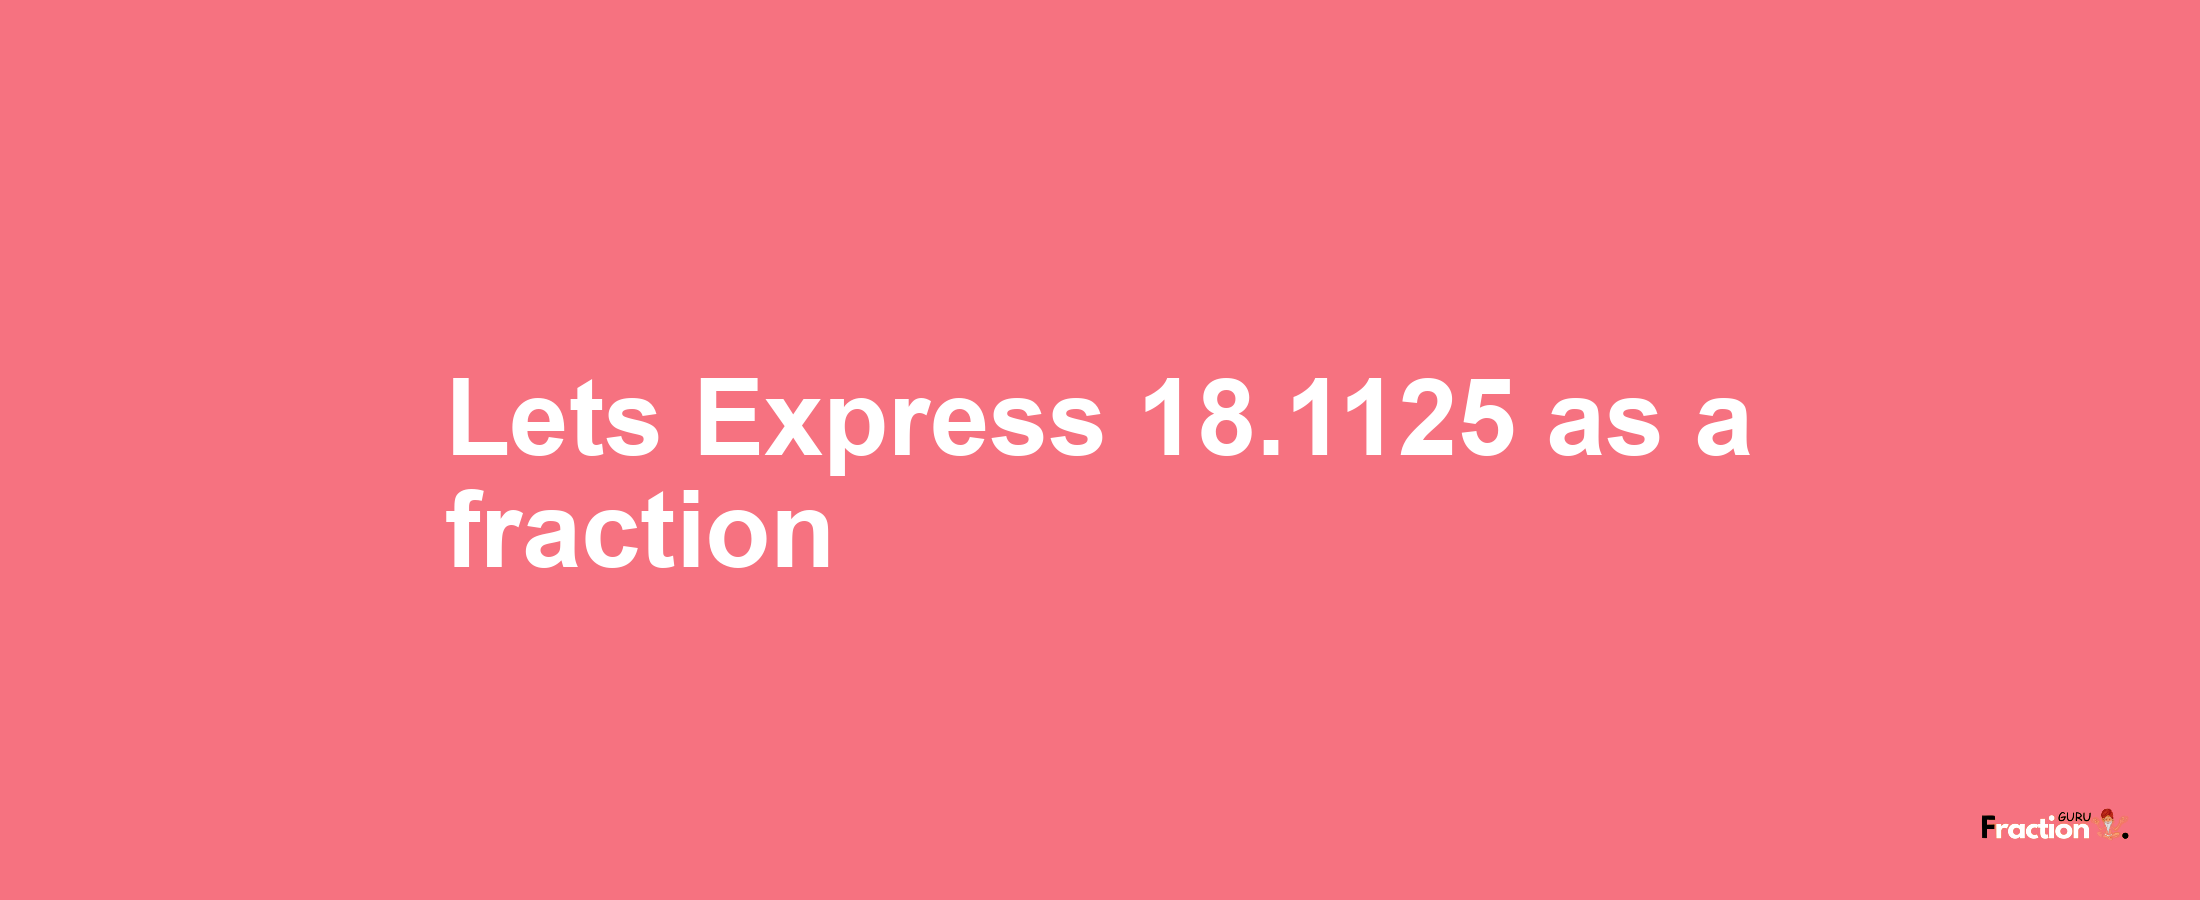 Lets Express 18.1125 as afraction